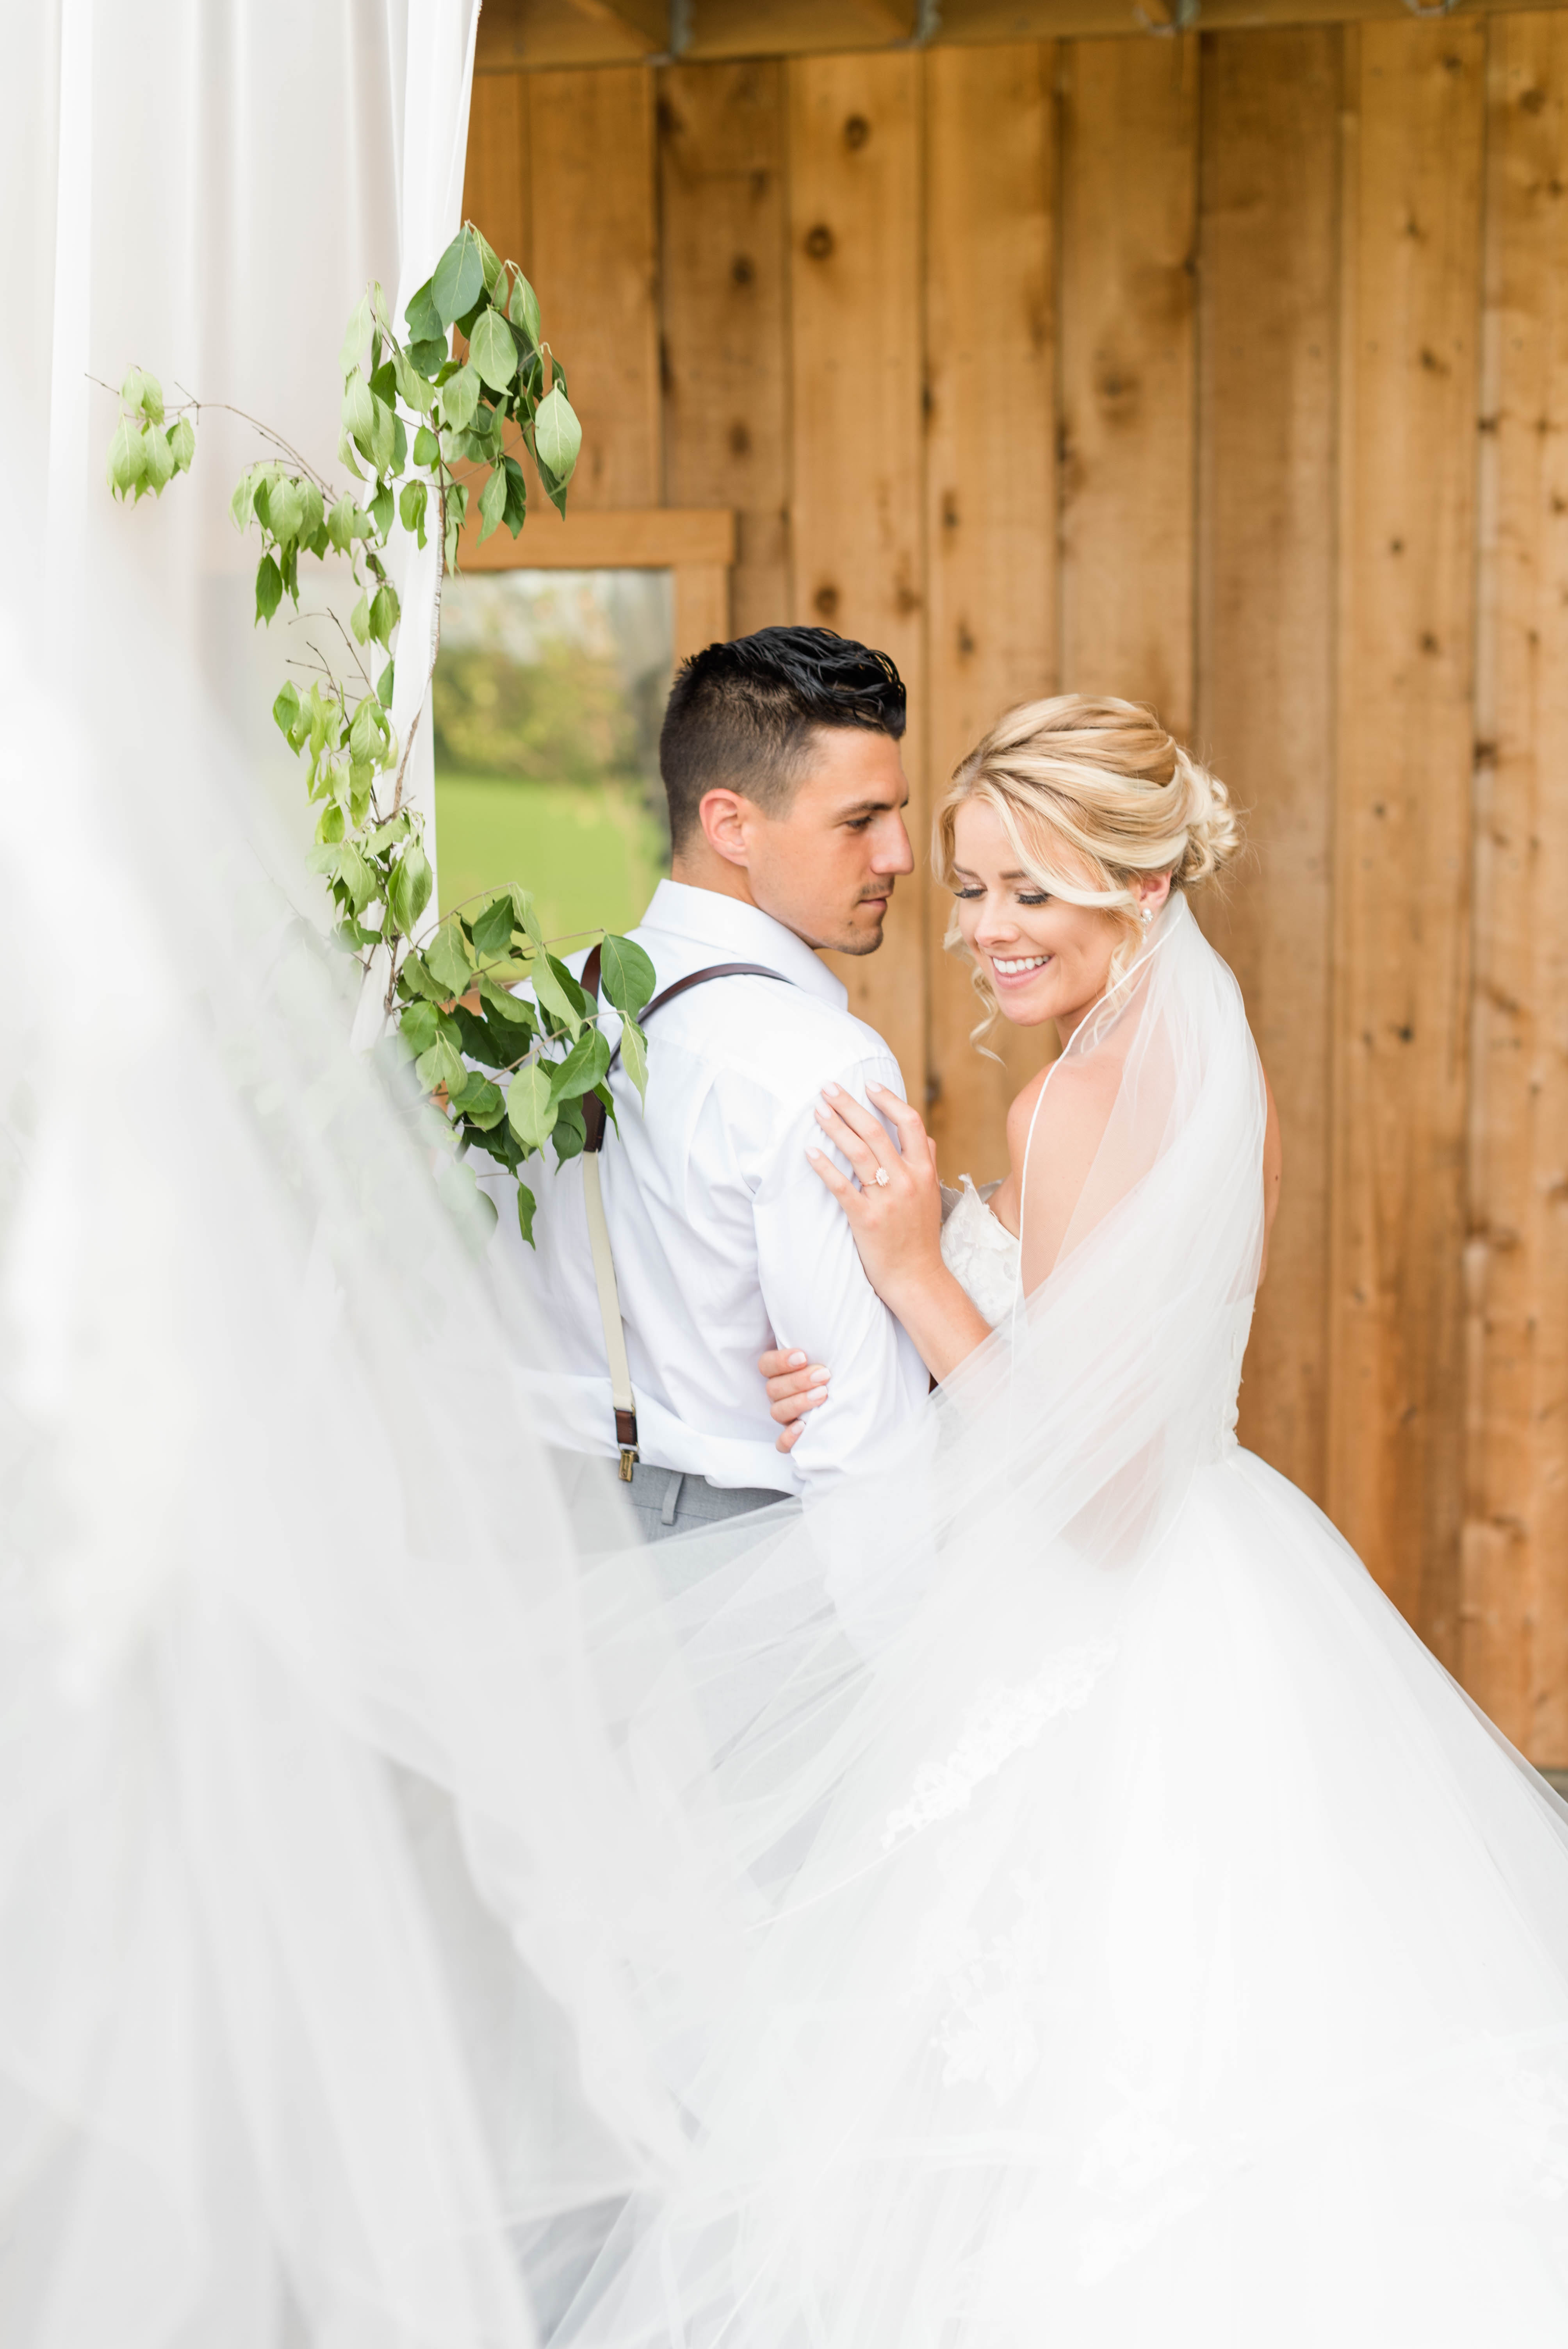 Romantic Fine Art Styled Shoot at The Rusty River Barn, Ohio, Sweet Williams Photography